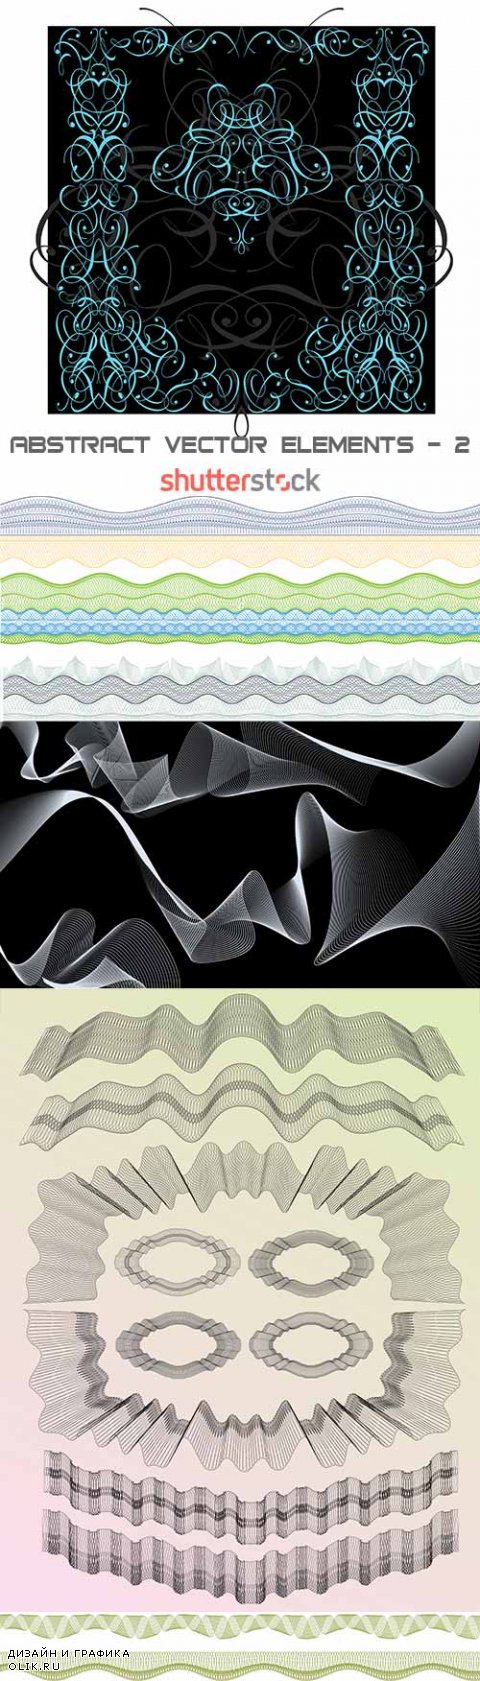 Abstract vector elements - 2